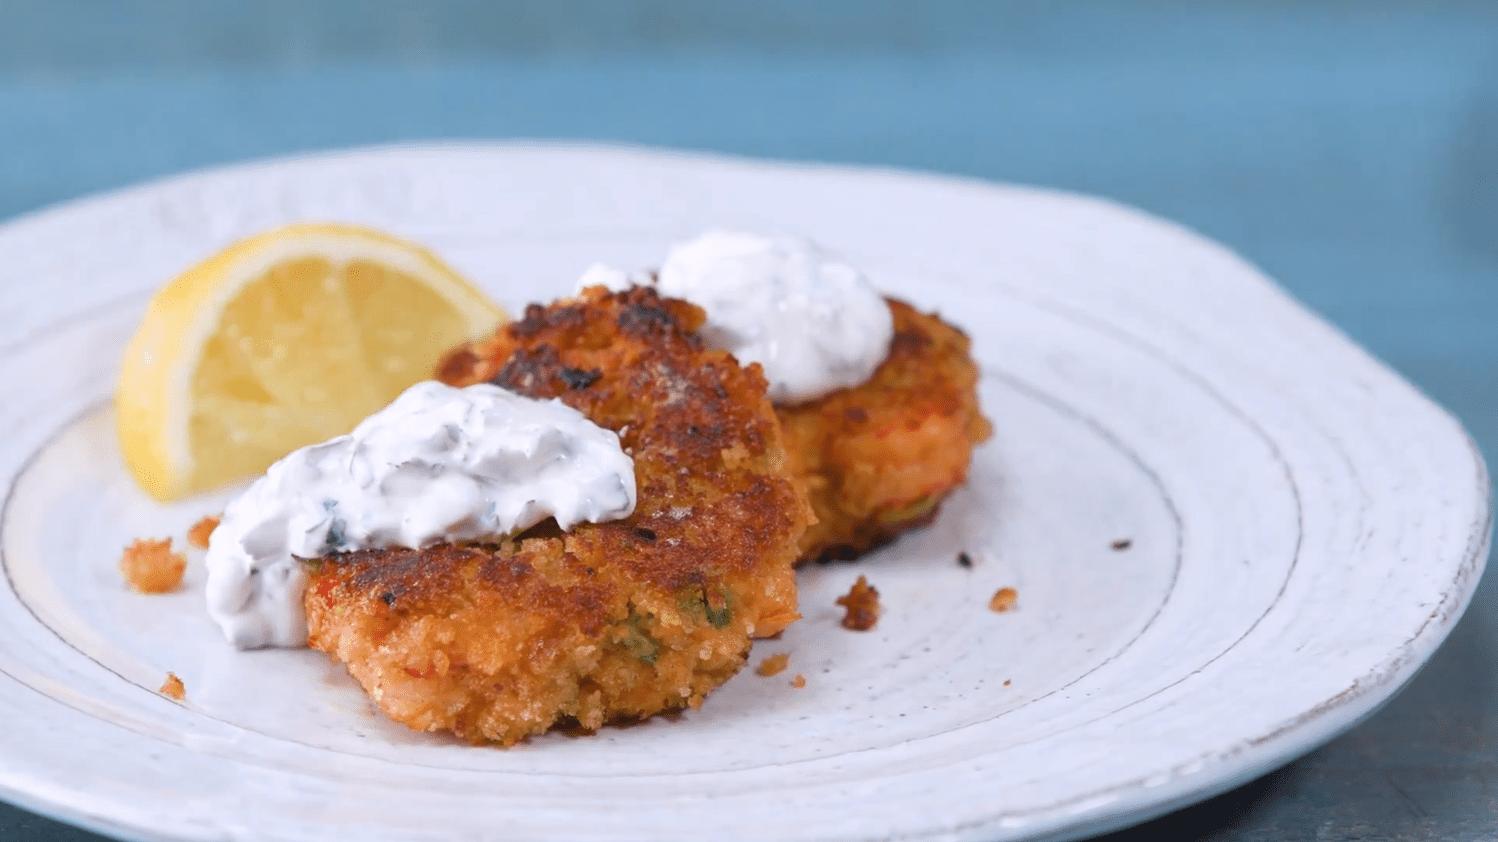 Irresistible Crawfish Cakes For Your Next BBQ!